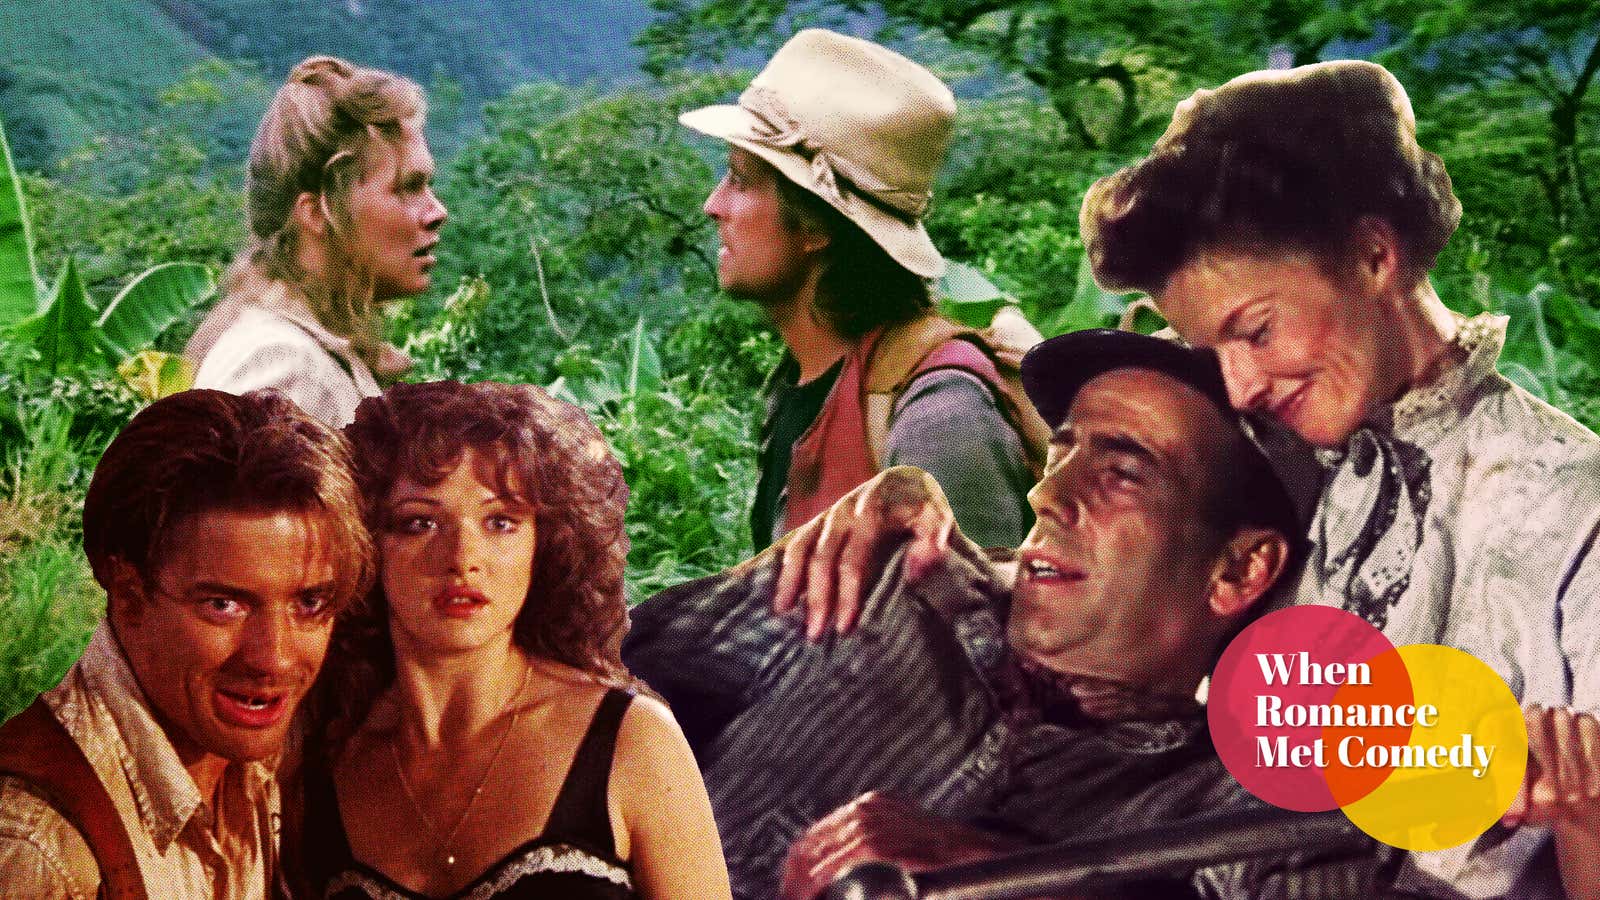 Clockwise from top left: Romancing The Stone, The African Queen, The Mummy (Screenshots)